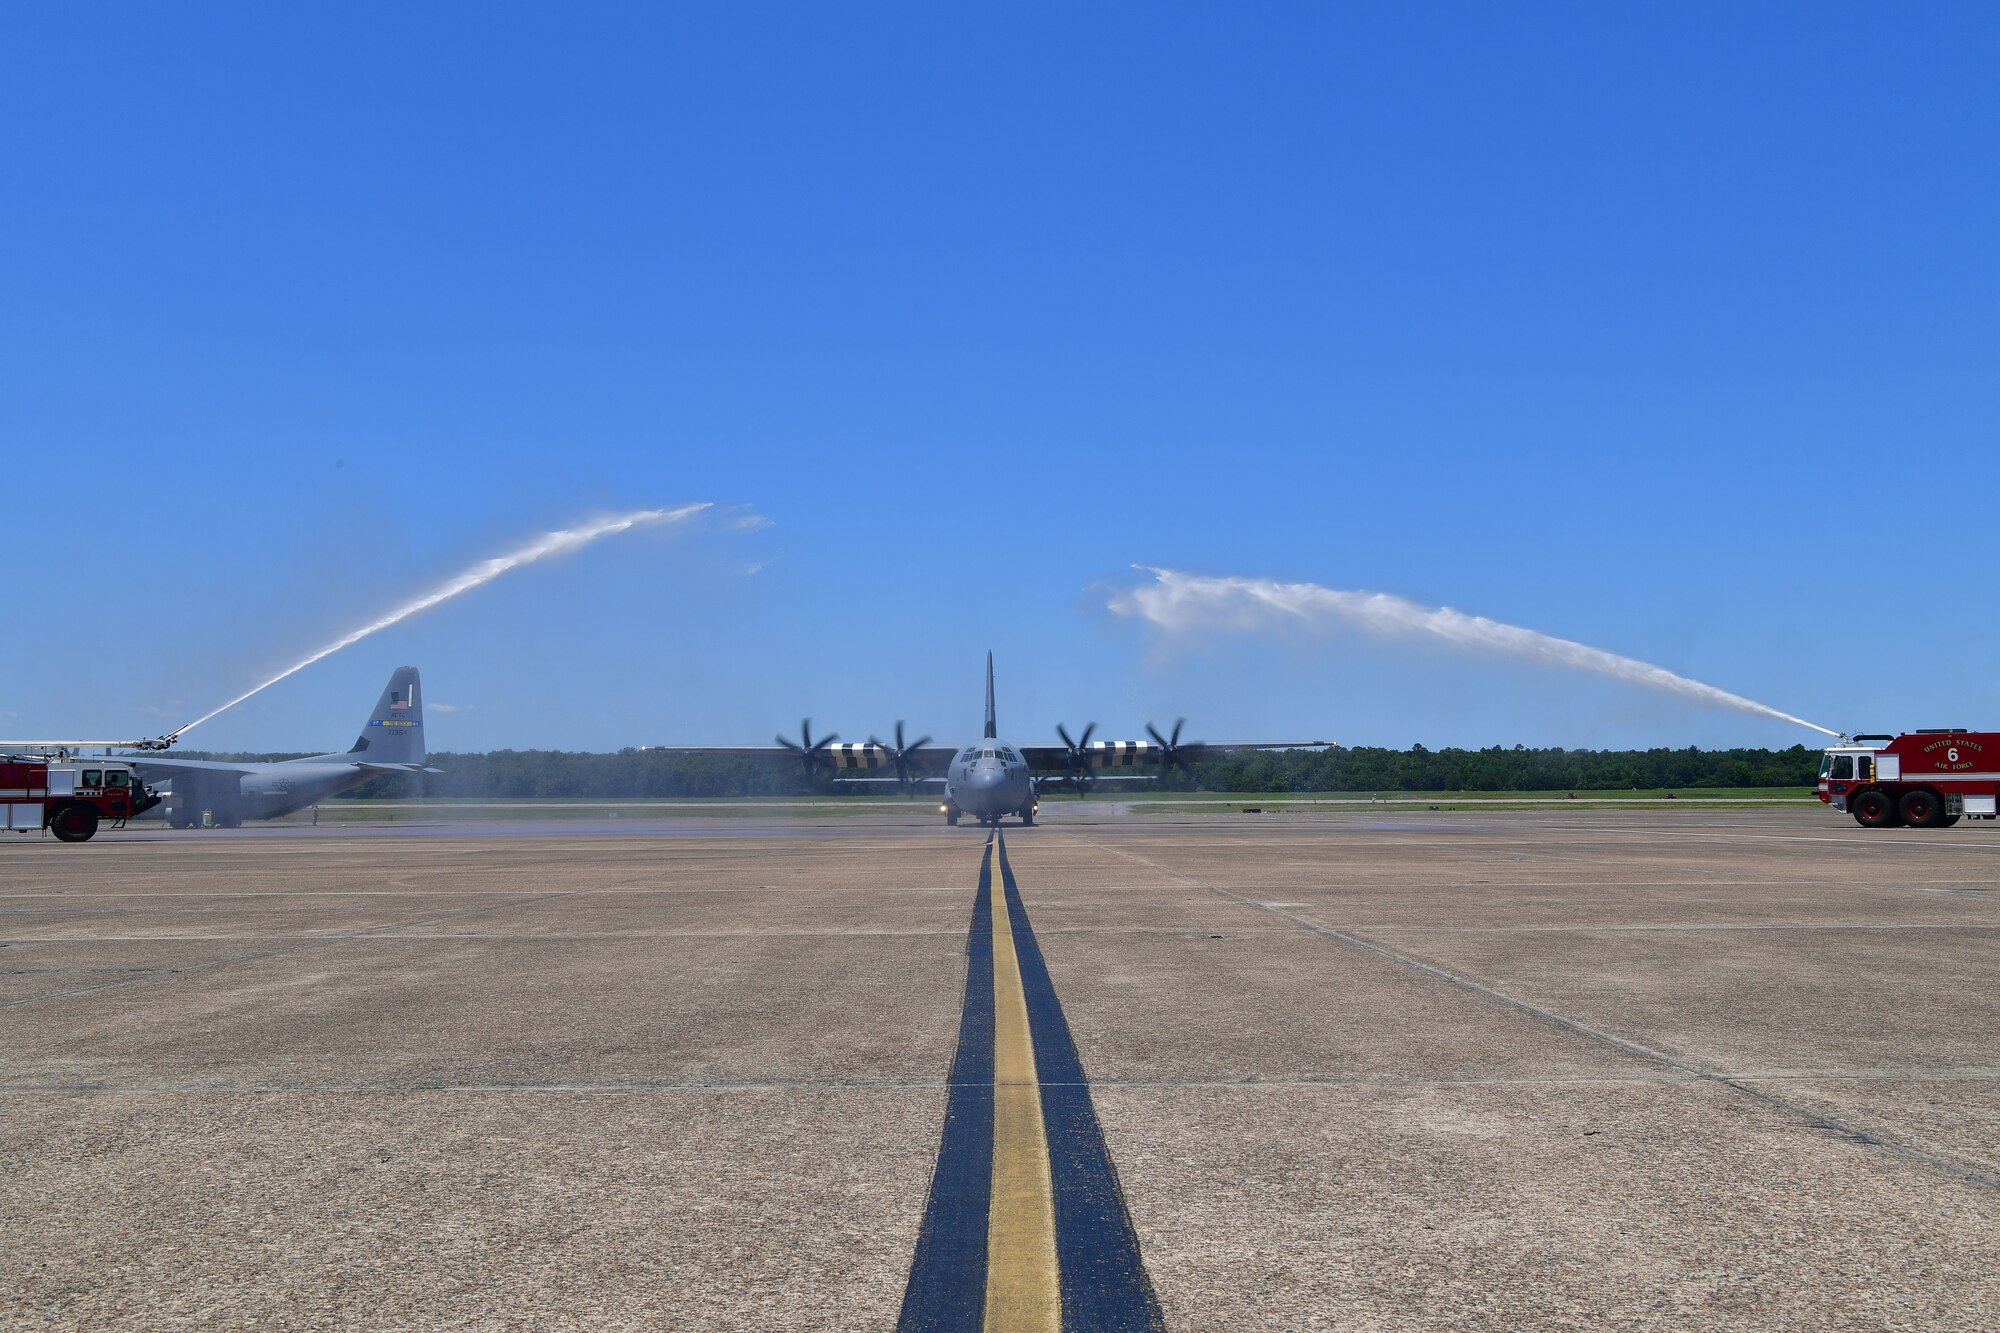 Col. Stephen Hodge, 314th Airlift Wing commander, taxis in from his final C-130J Super Hercules sortie as commander of the wing at Little Rock Air Force Base, Arkansas, June 12, 2020. The 314th AW is the nation's tactical airlift "Center of Excellence" and trains C-130 aircrew members from the Department of Defense, Coast Guard and 47 partner nations. (U.S. Air Force photo by Airman 1st Class Aaron Irvin)